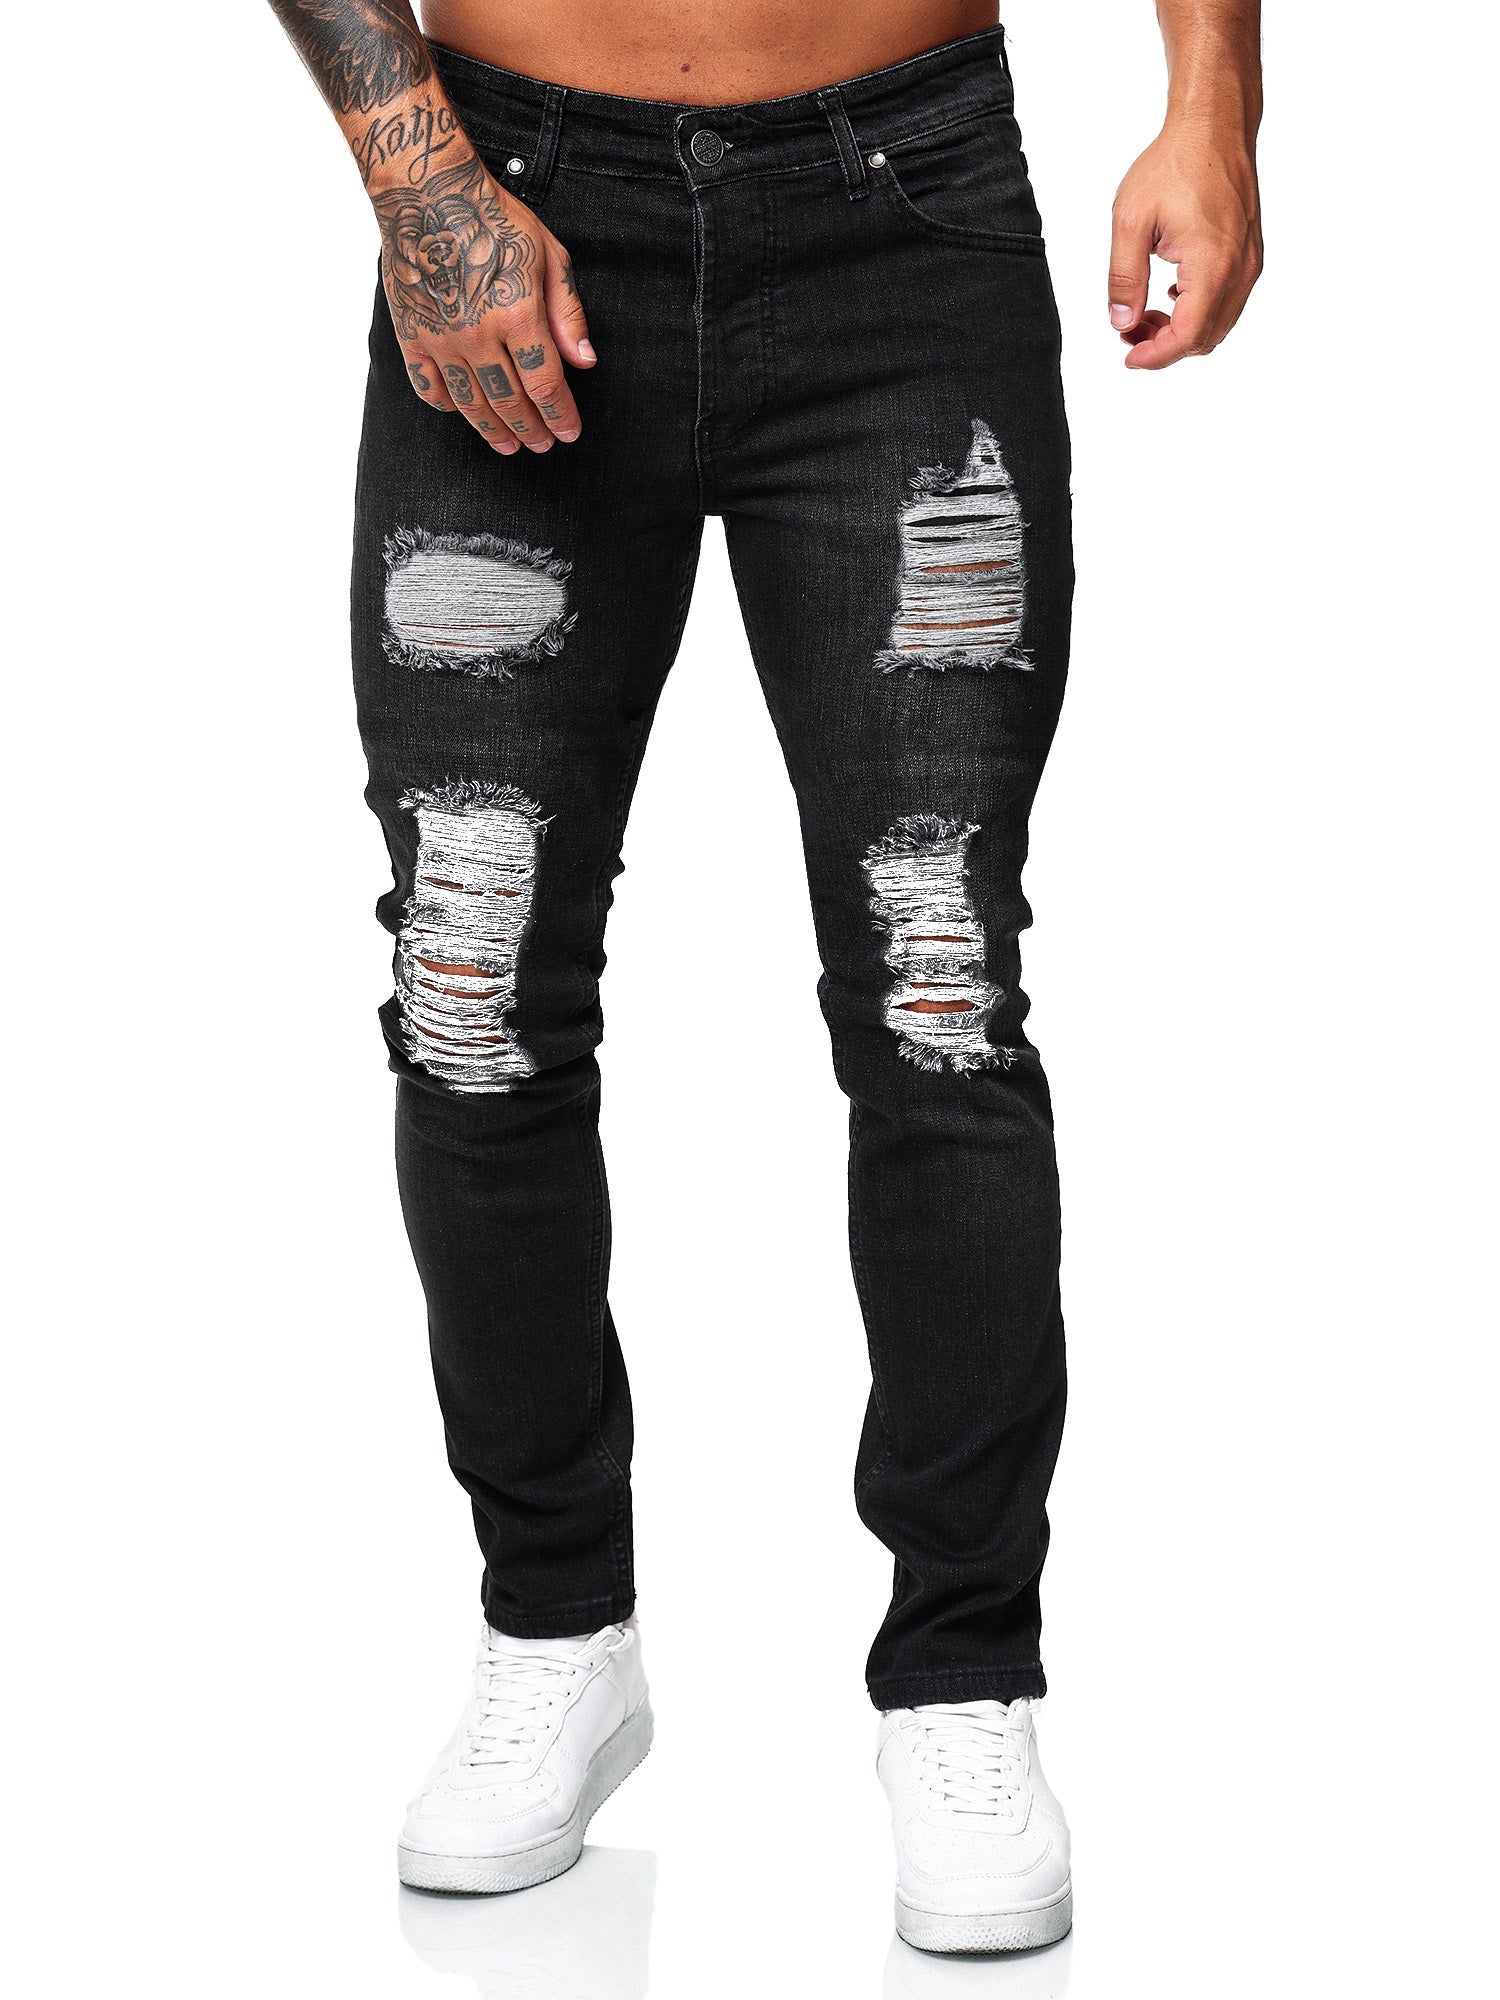 Cool Hip Hop Skinny Ripped Jeans For Men – CLiQoasis